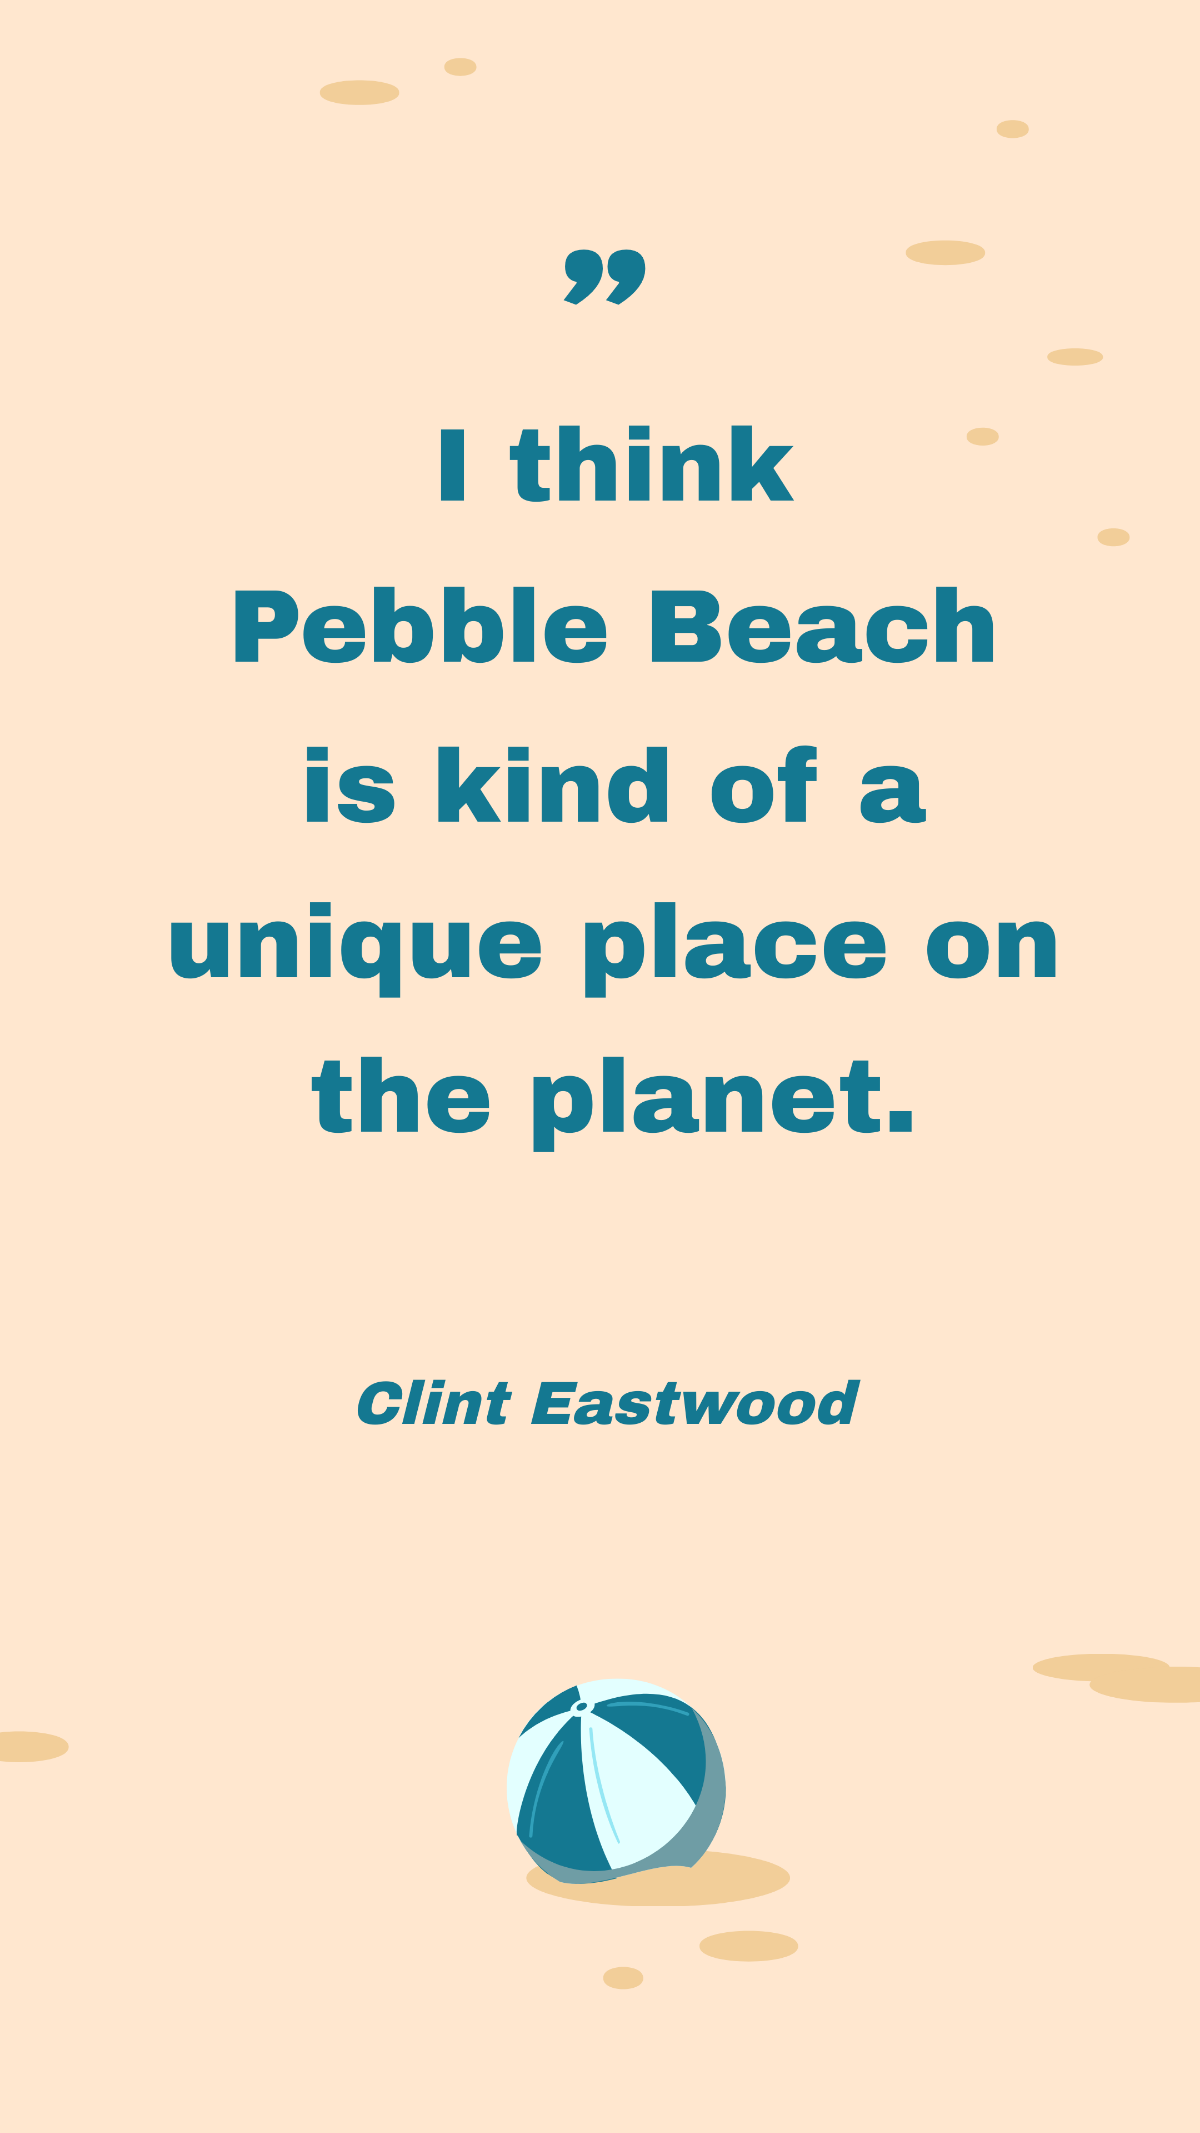 Free Clint Eastwood - I think Pebble Beach is kind of a unique place on the planet. Template